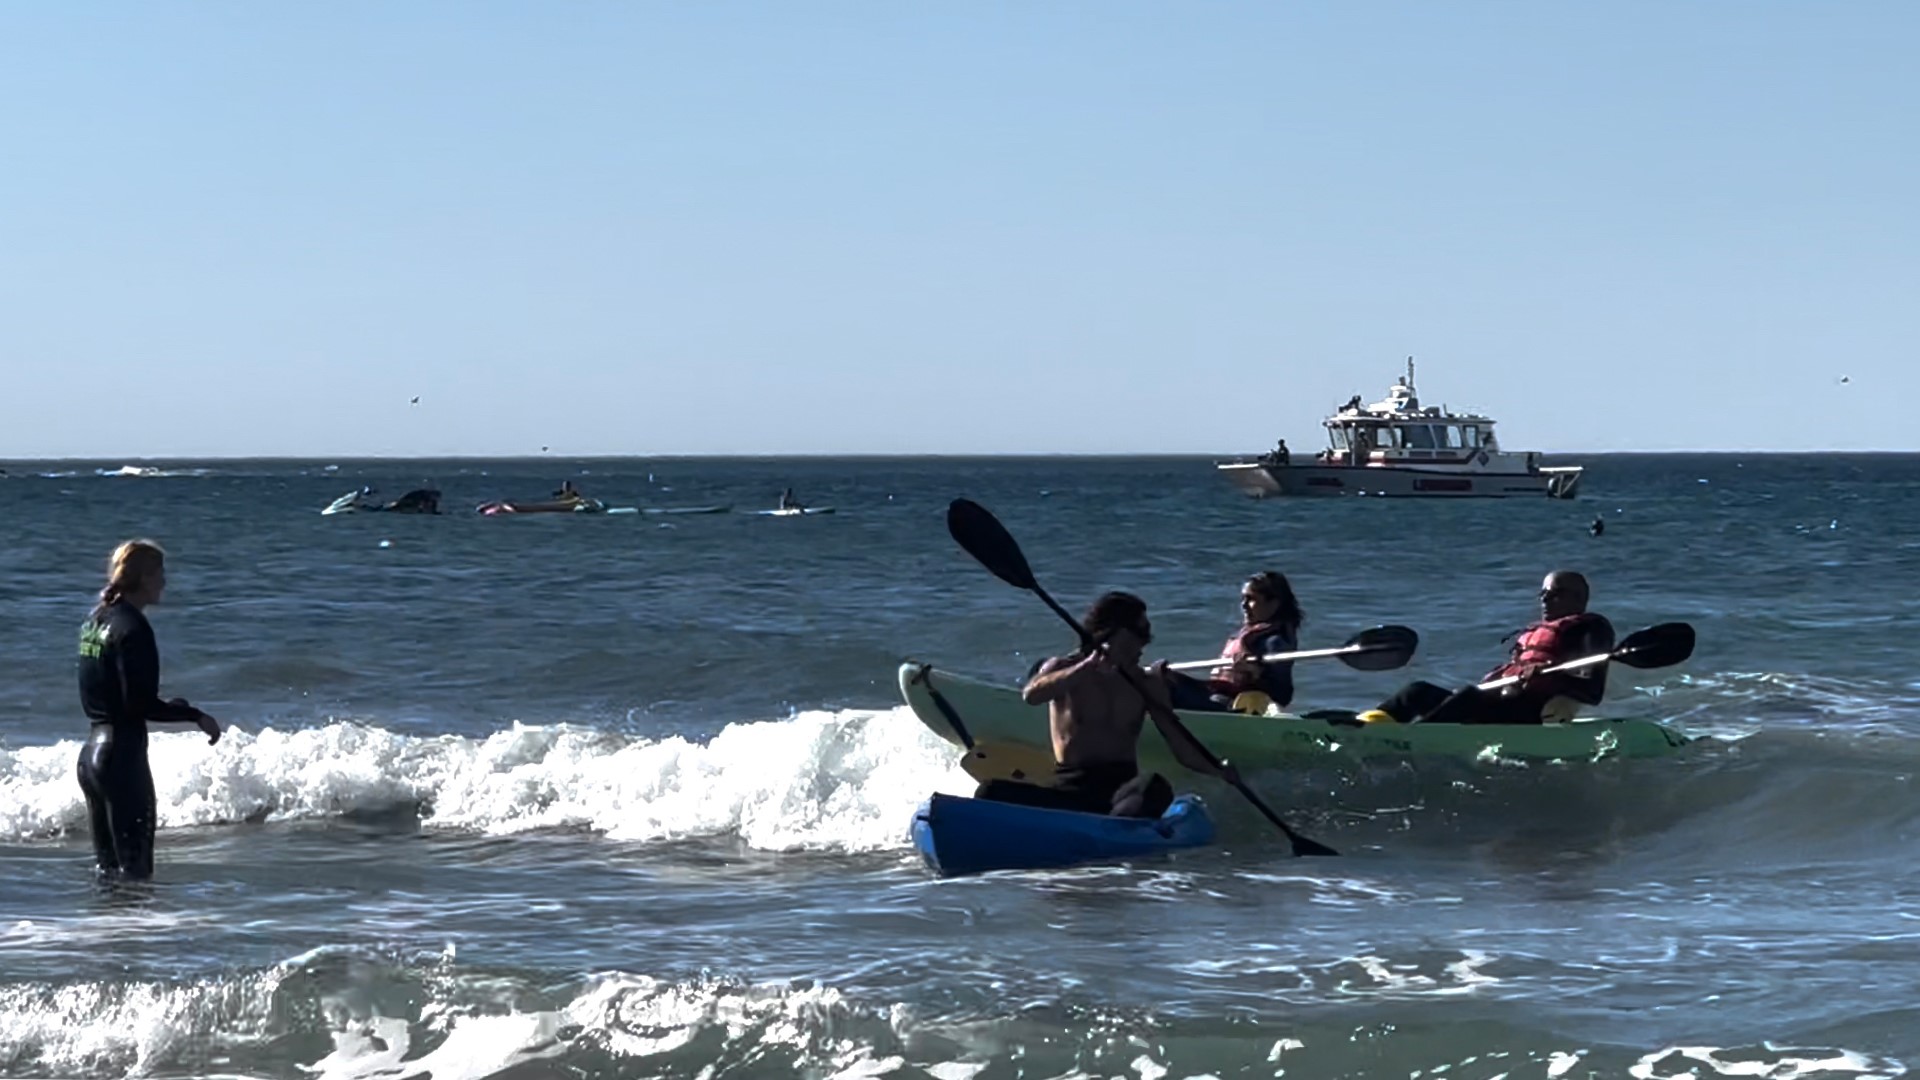 Thirty kayakers were rescued after being wind-whipped and overturned off the coast of La Jolla.